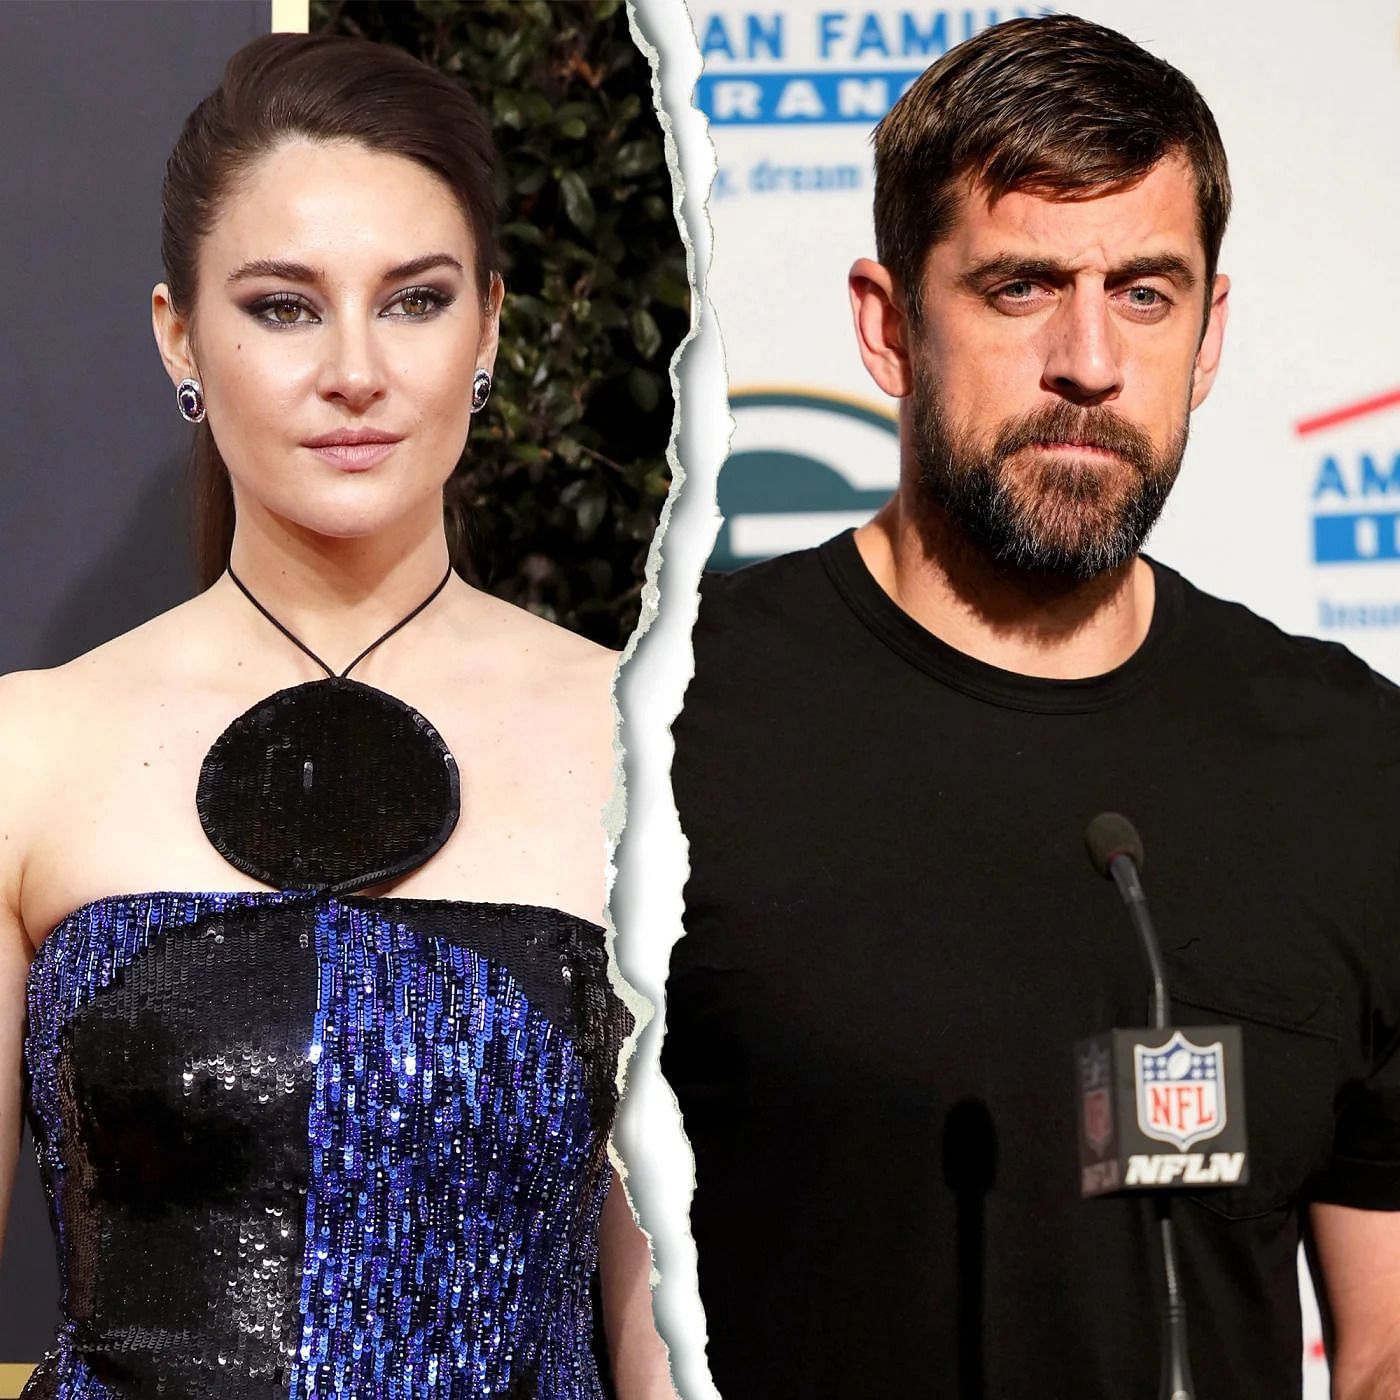 Actress Shailene Woodley and Packers QB Aaron Rodgers